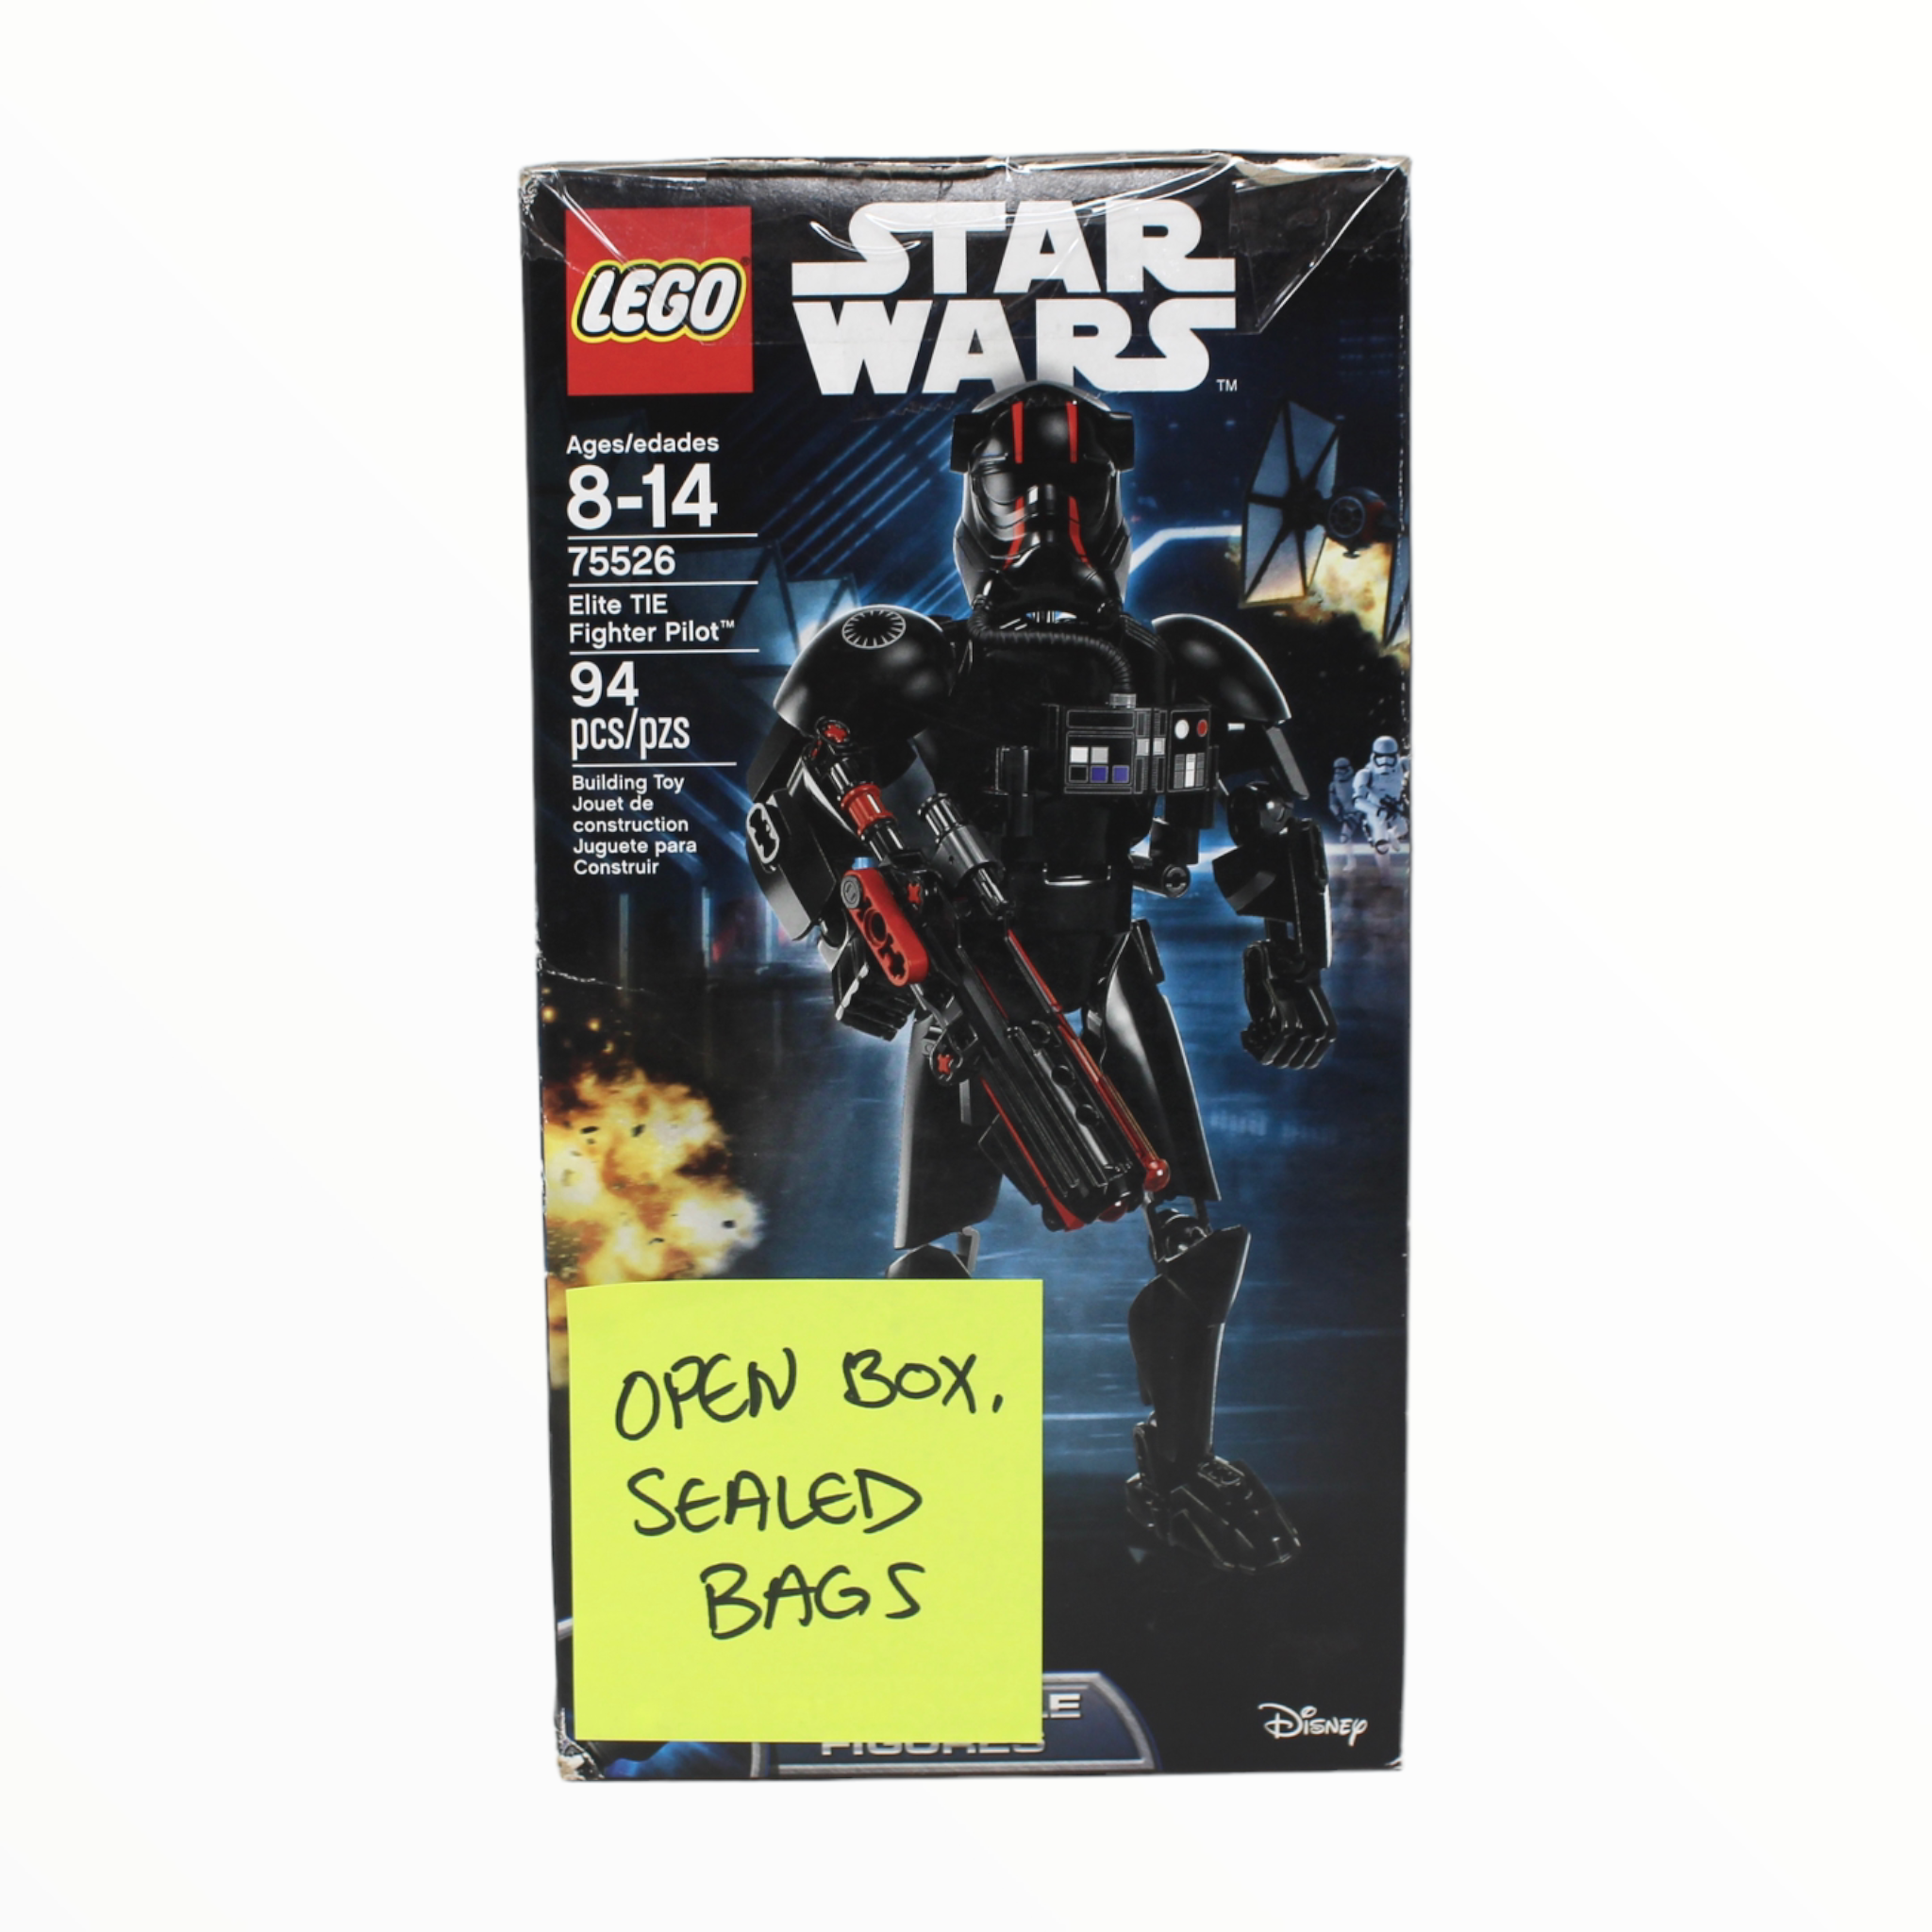 Certified Used Set 75526 Star Wars Buildable Figures Elite TIE Fighter Pilot (open box, sealed bags)